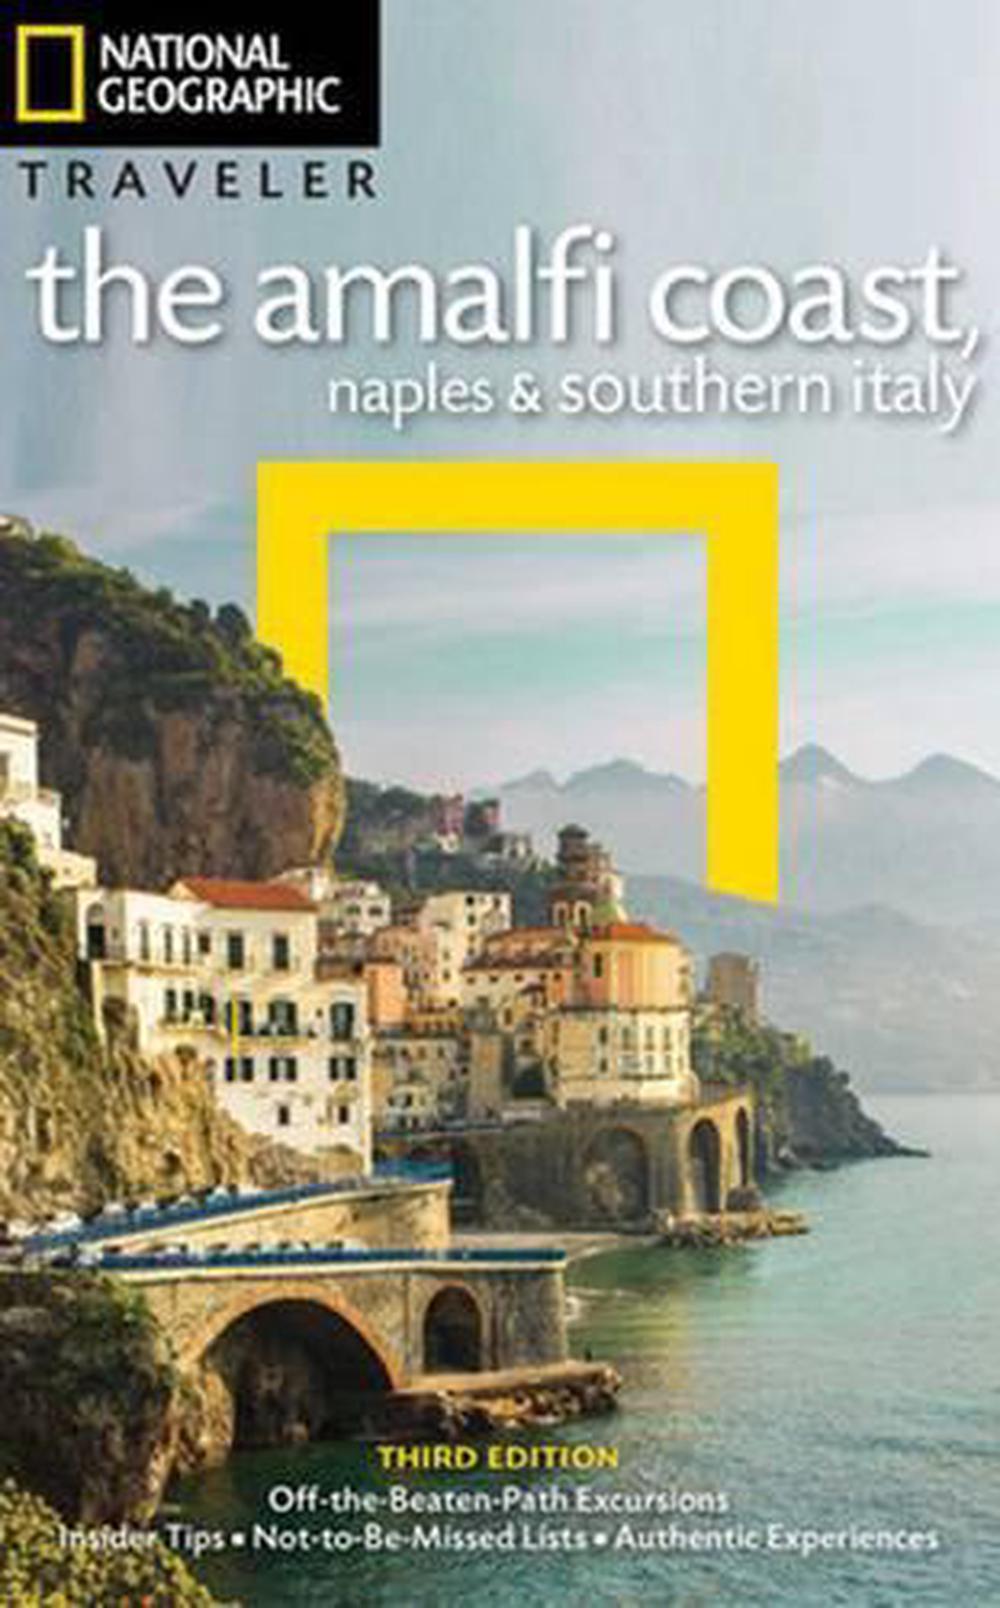 national geographic italy travel guide